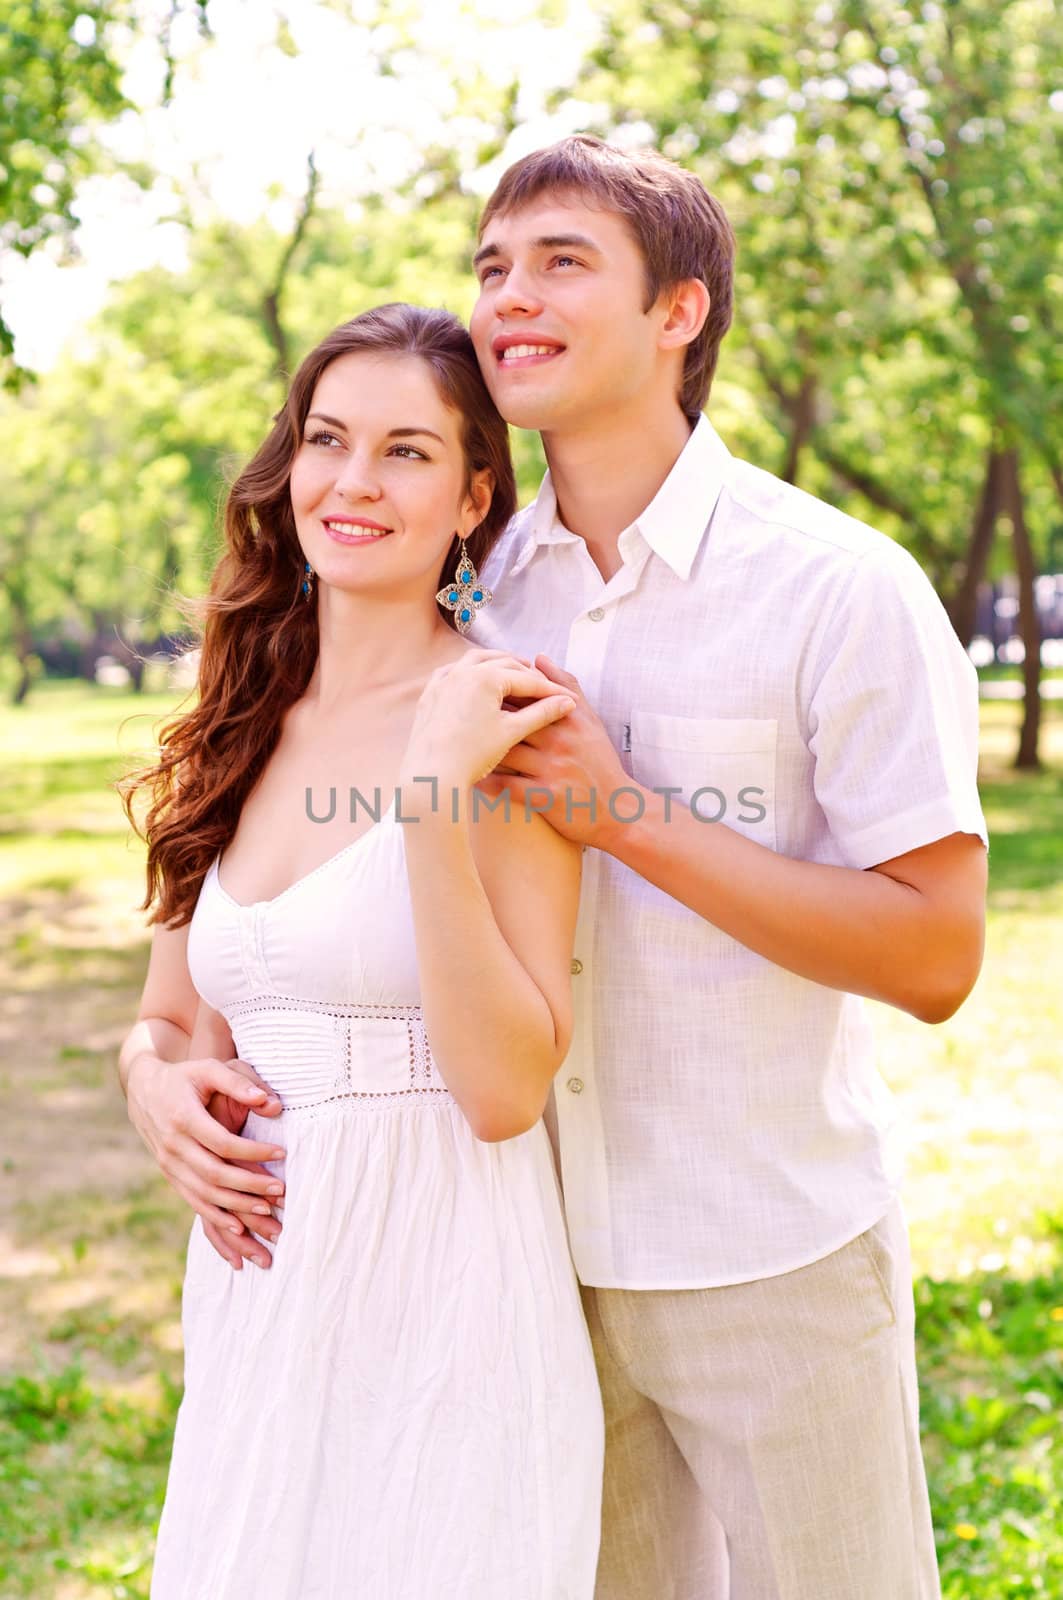 couple hugging in the park, have a good time together